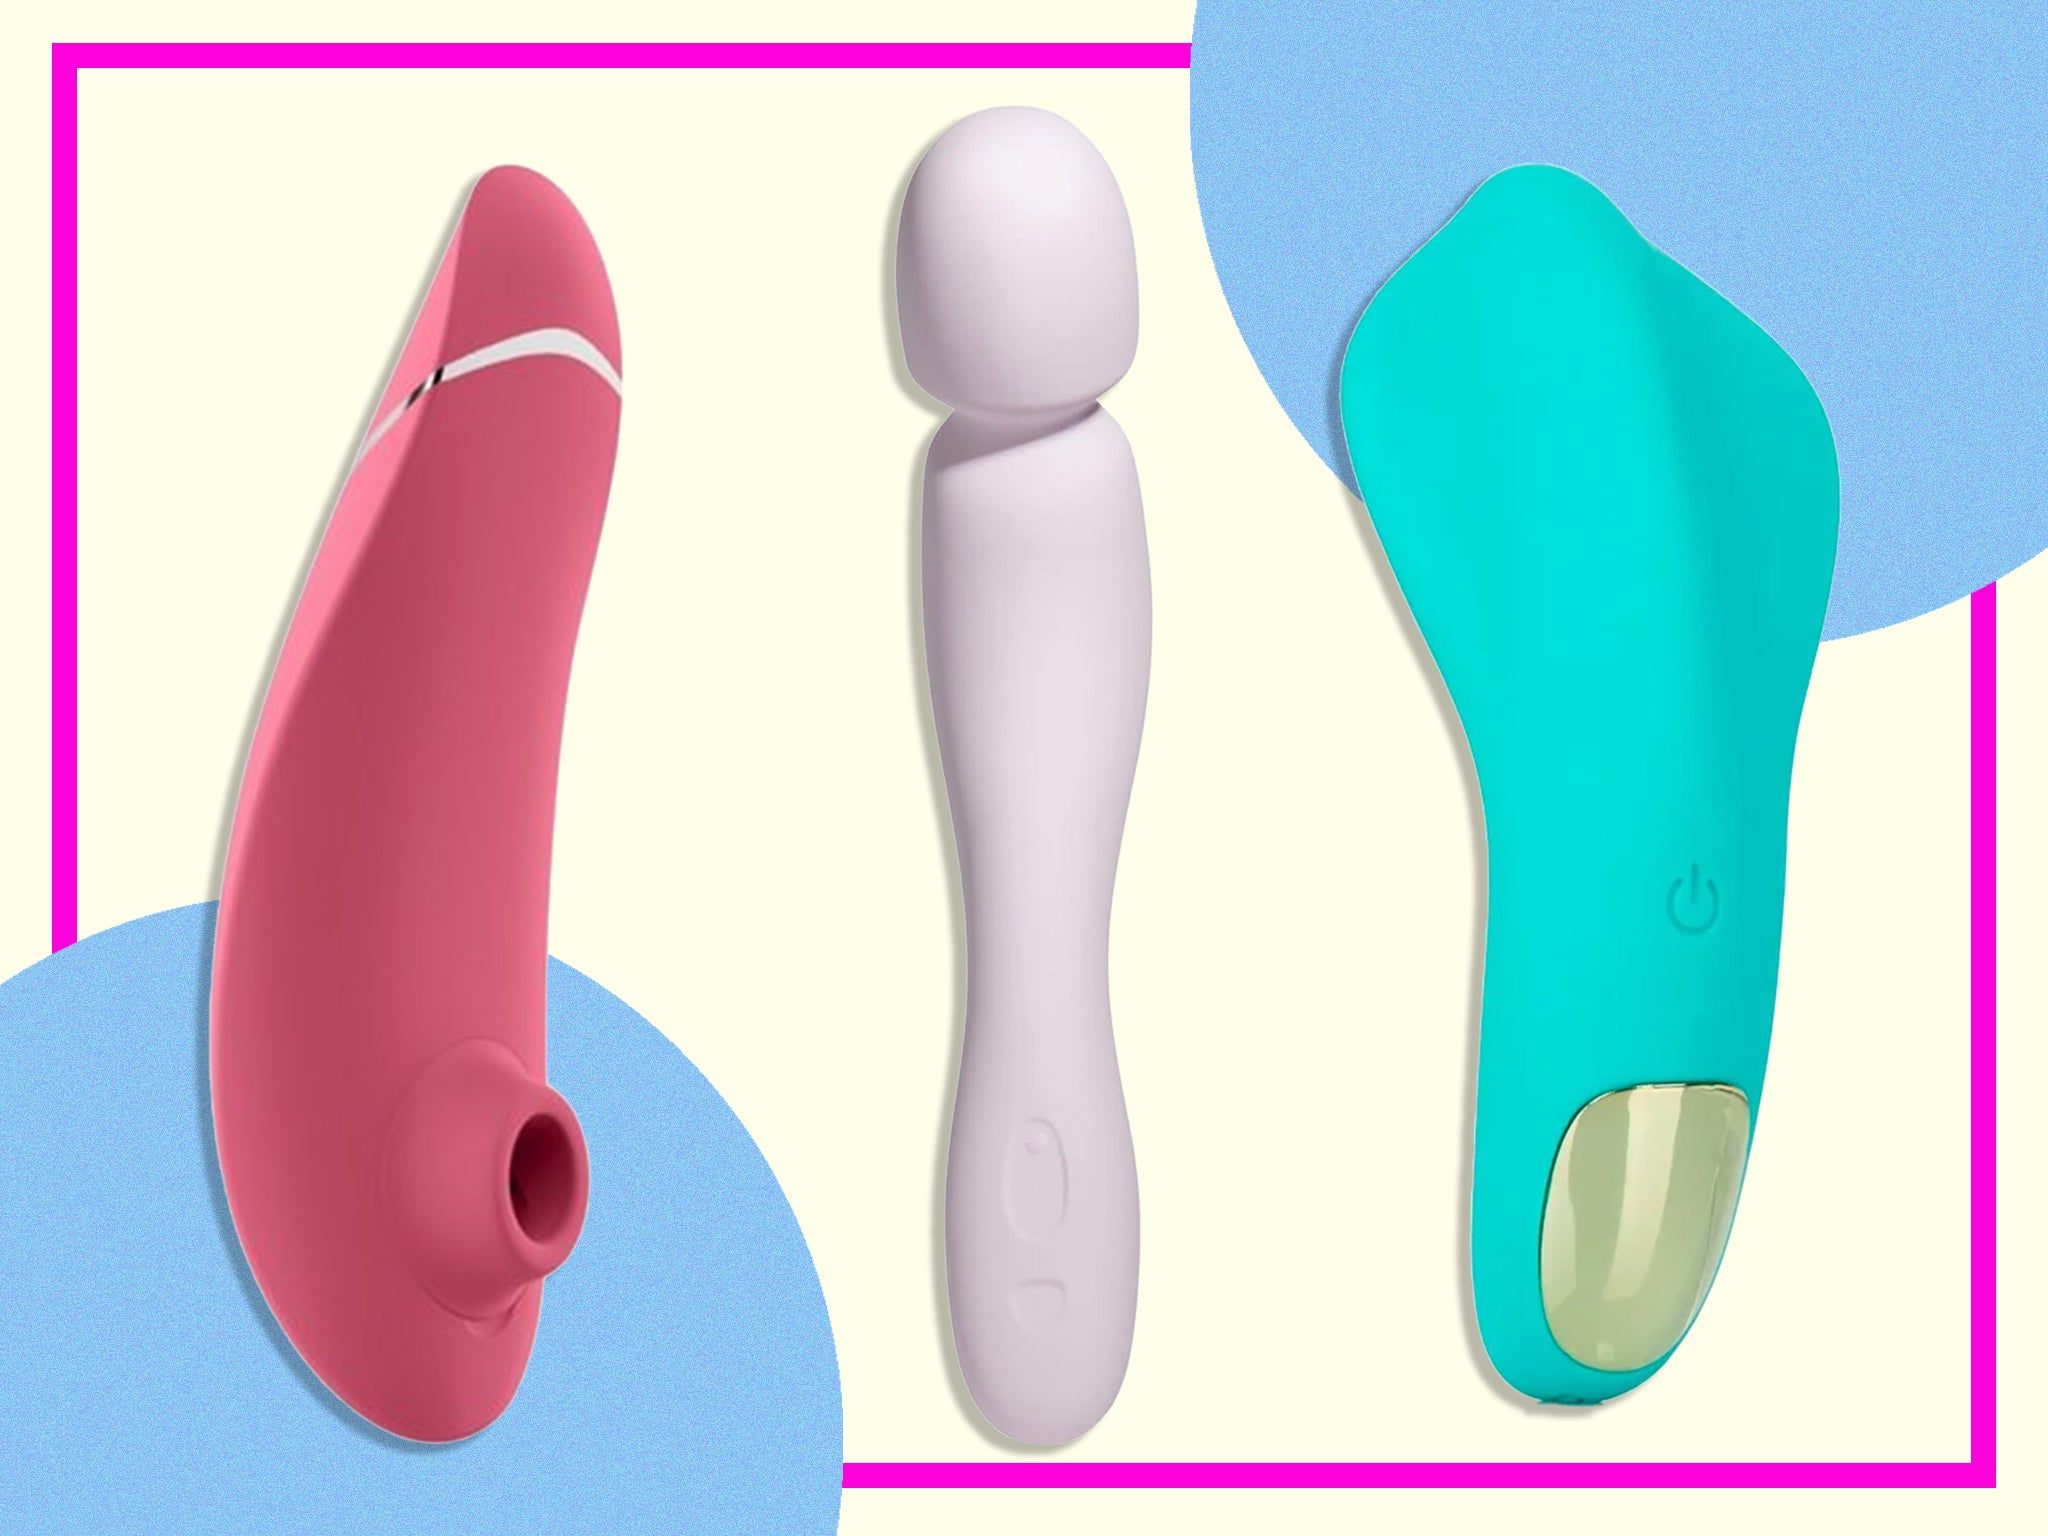 Best clit vibrators 2022 Magic wands, bullets, suction toys and more The Independent image